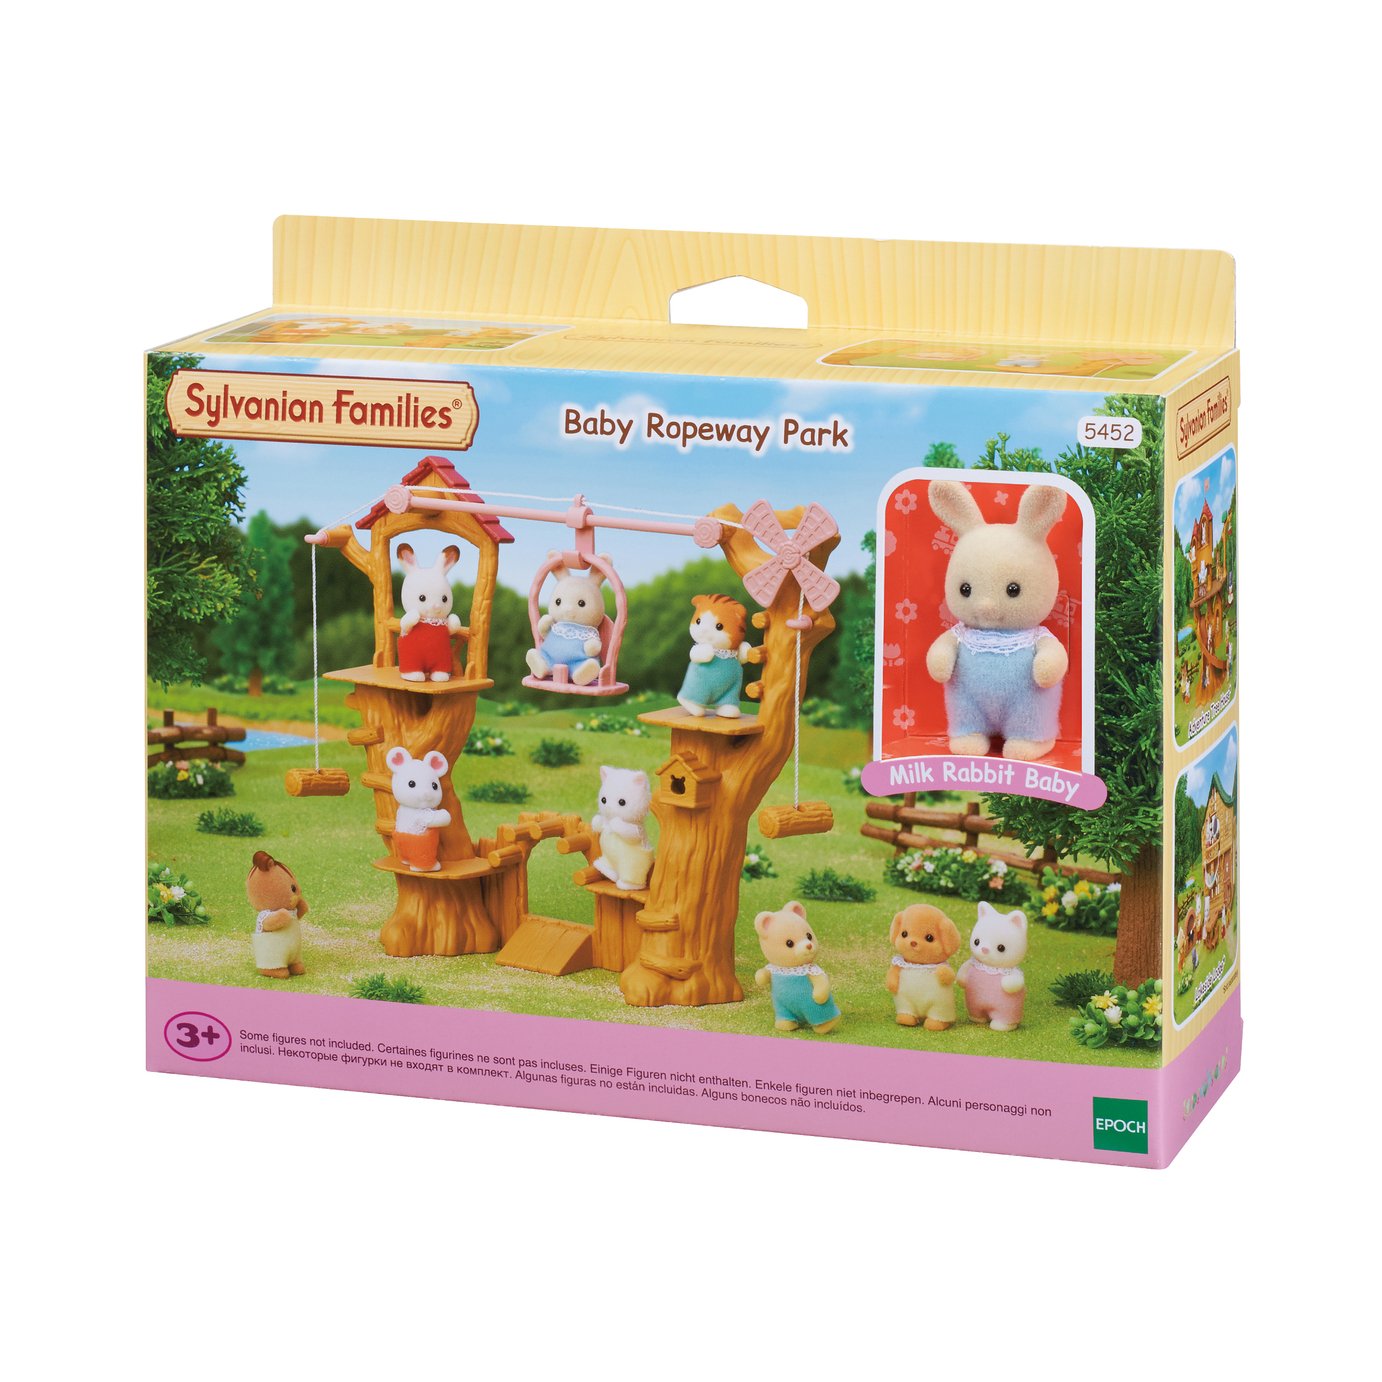 Sylvanian Families Baby Ropeway Park Review